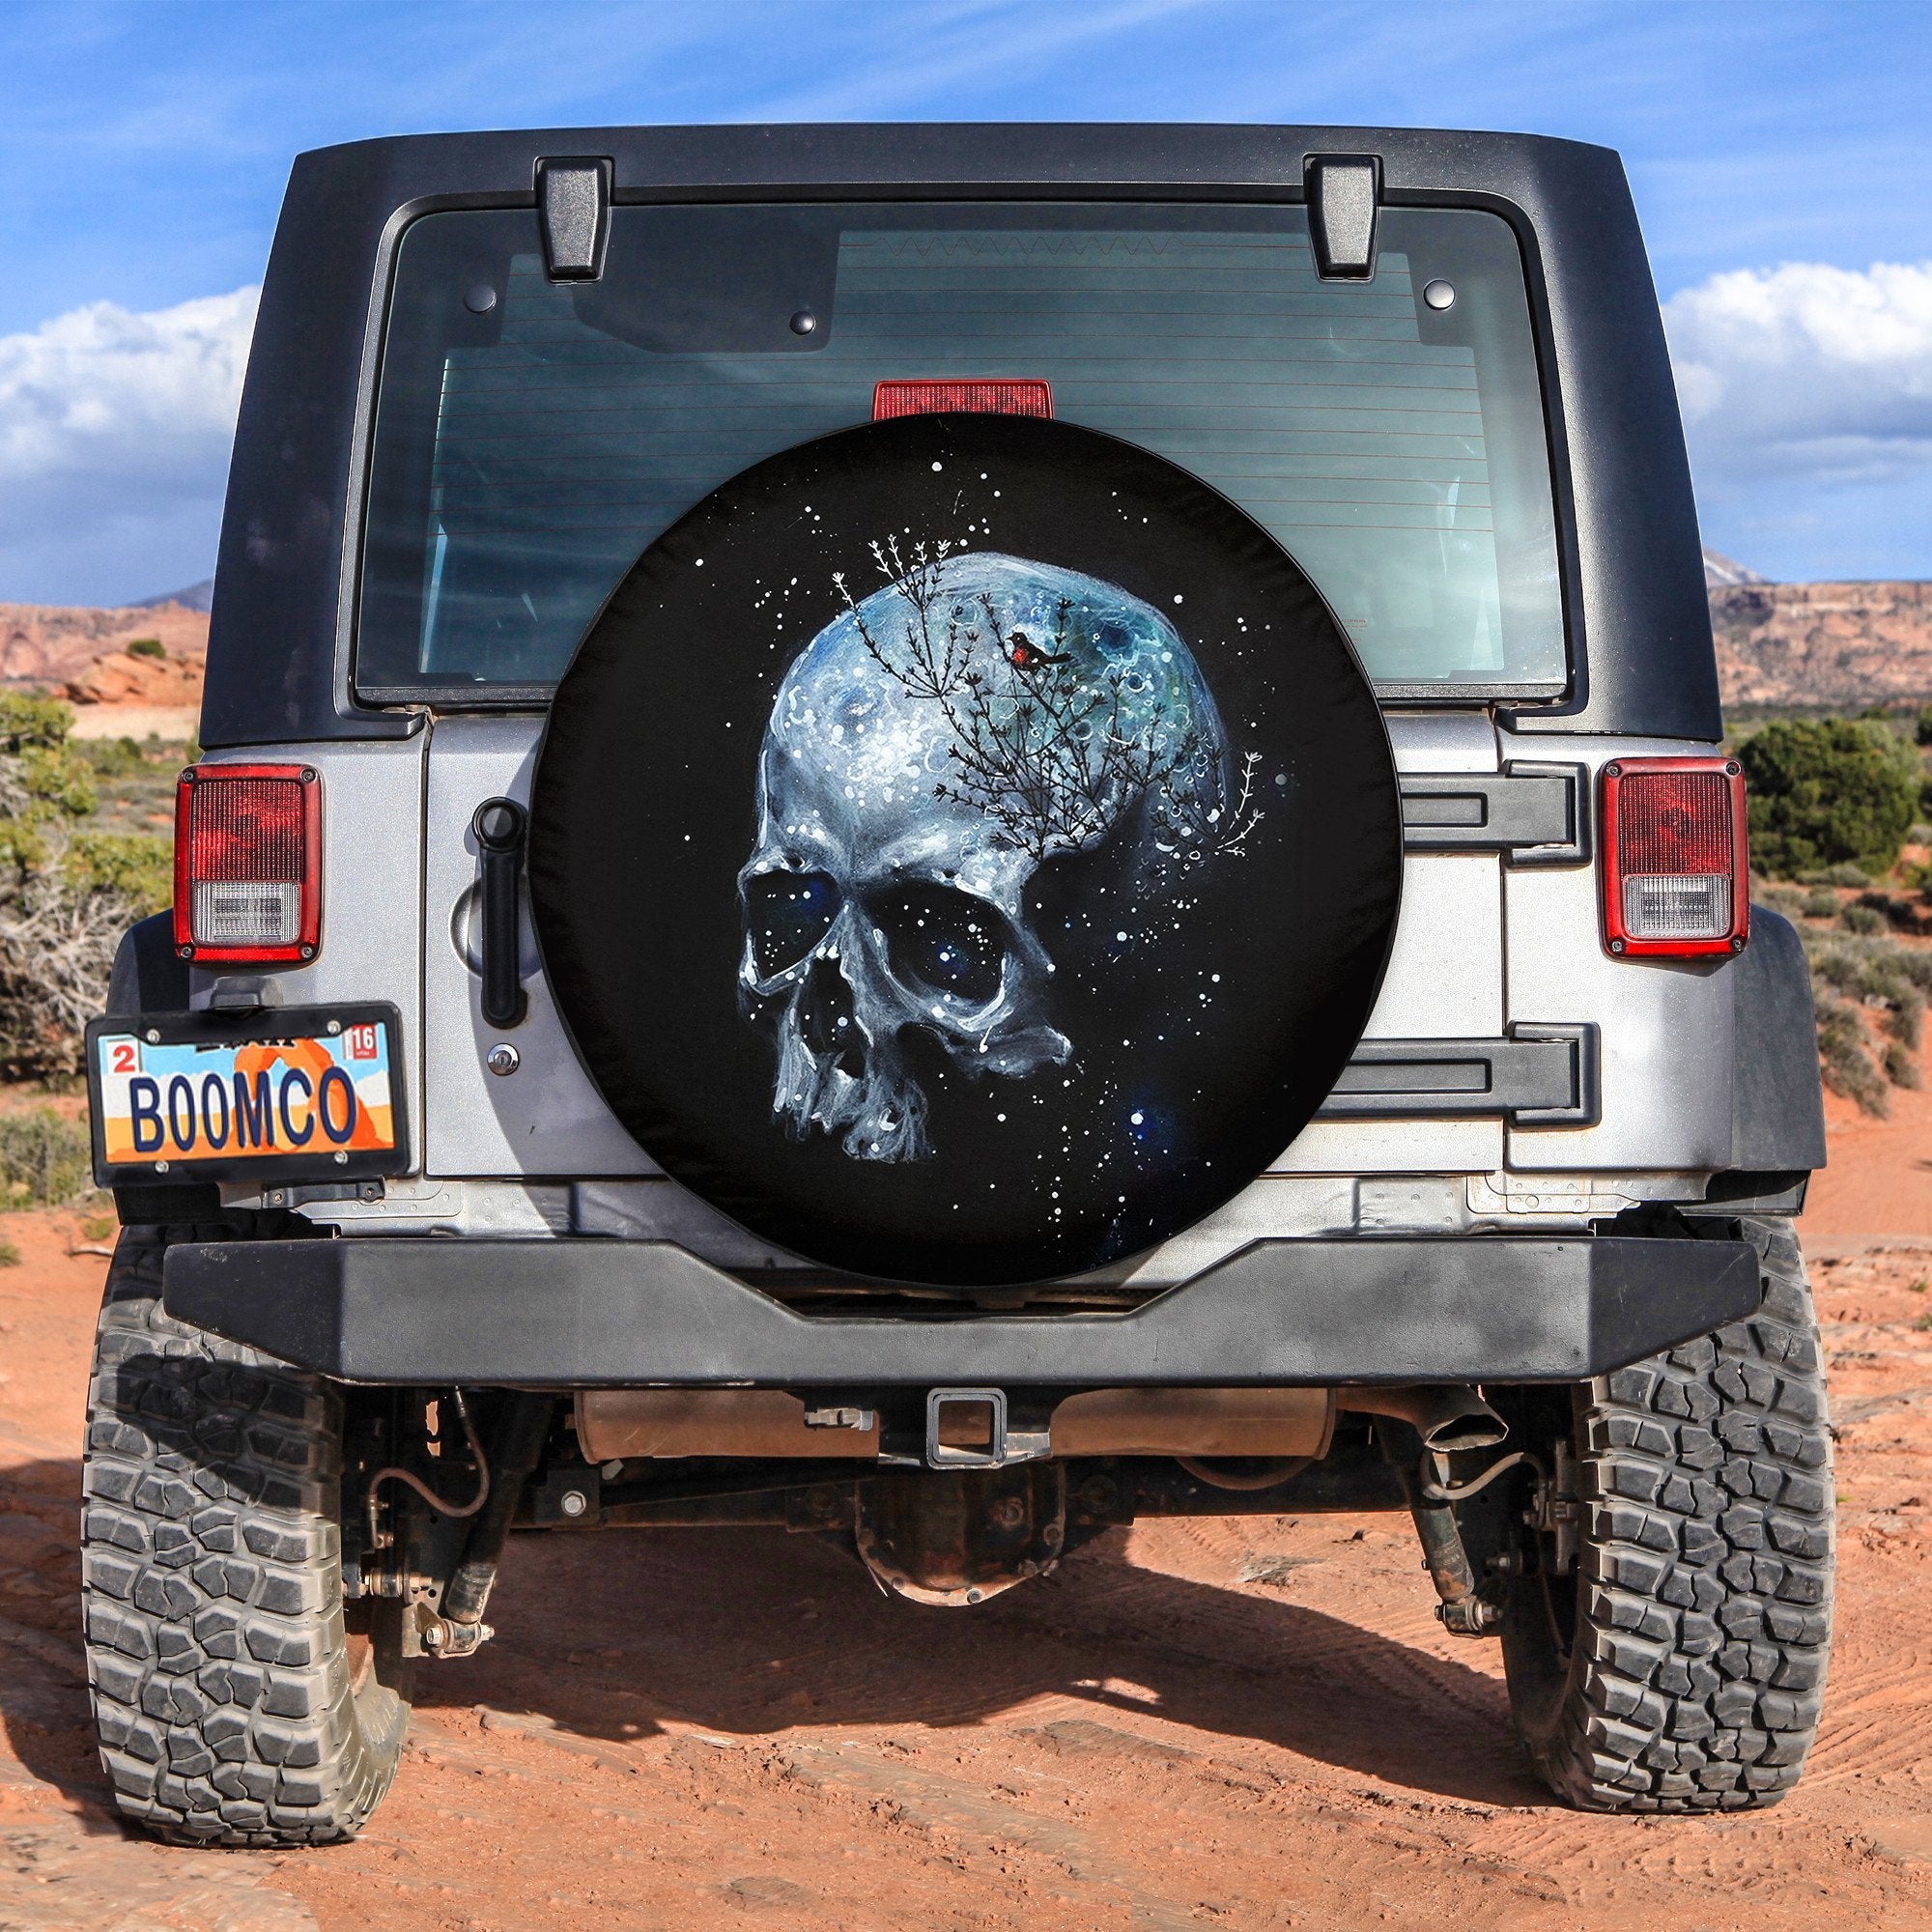 Skull Spare Tire Cover Gift For Campers